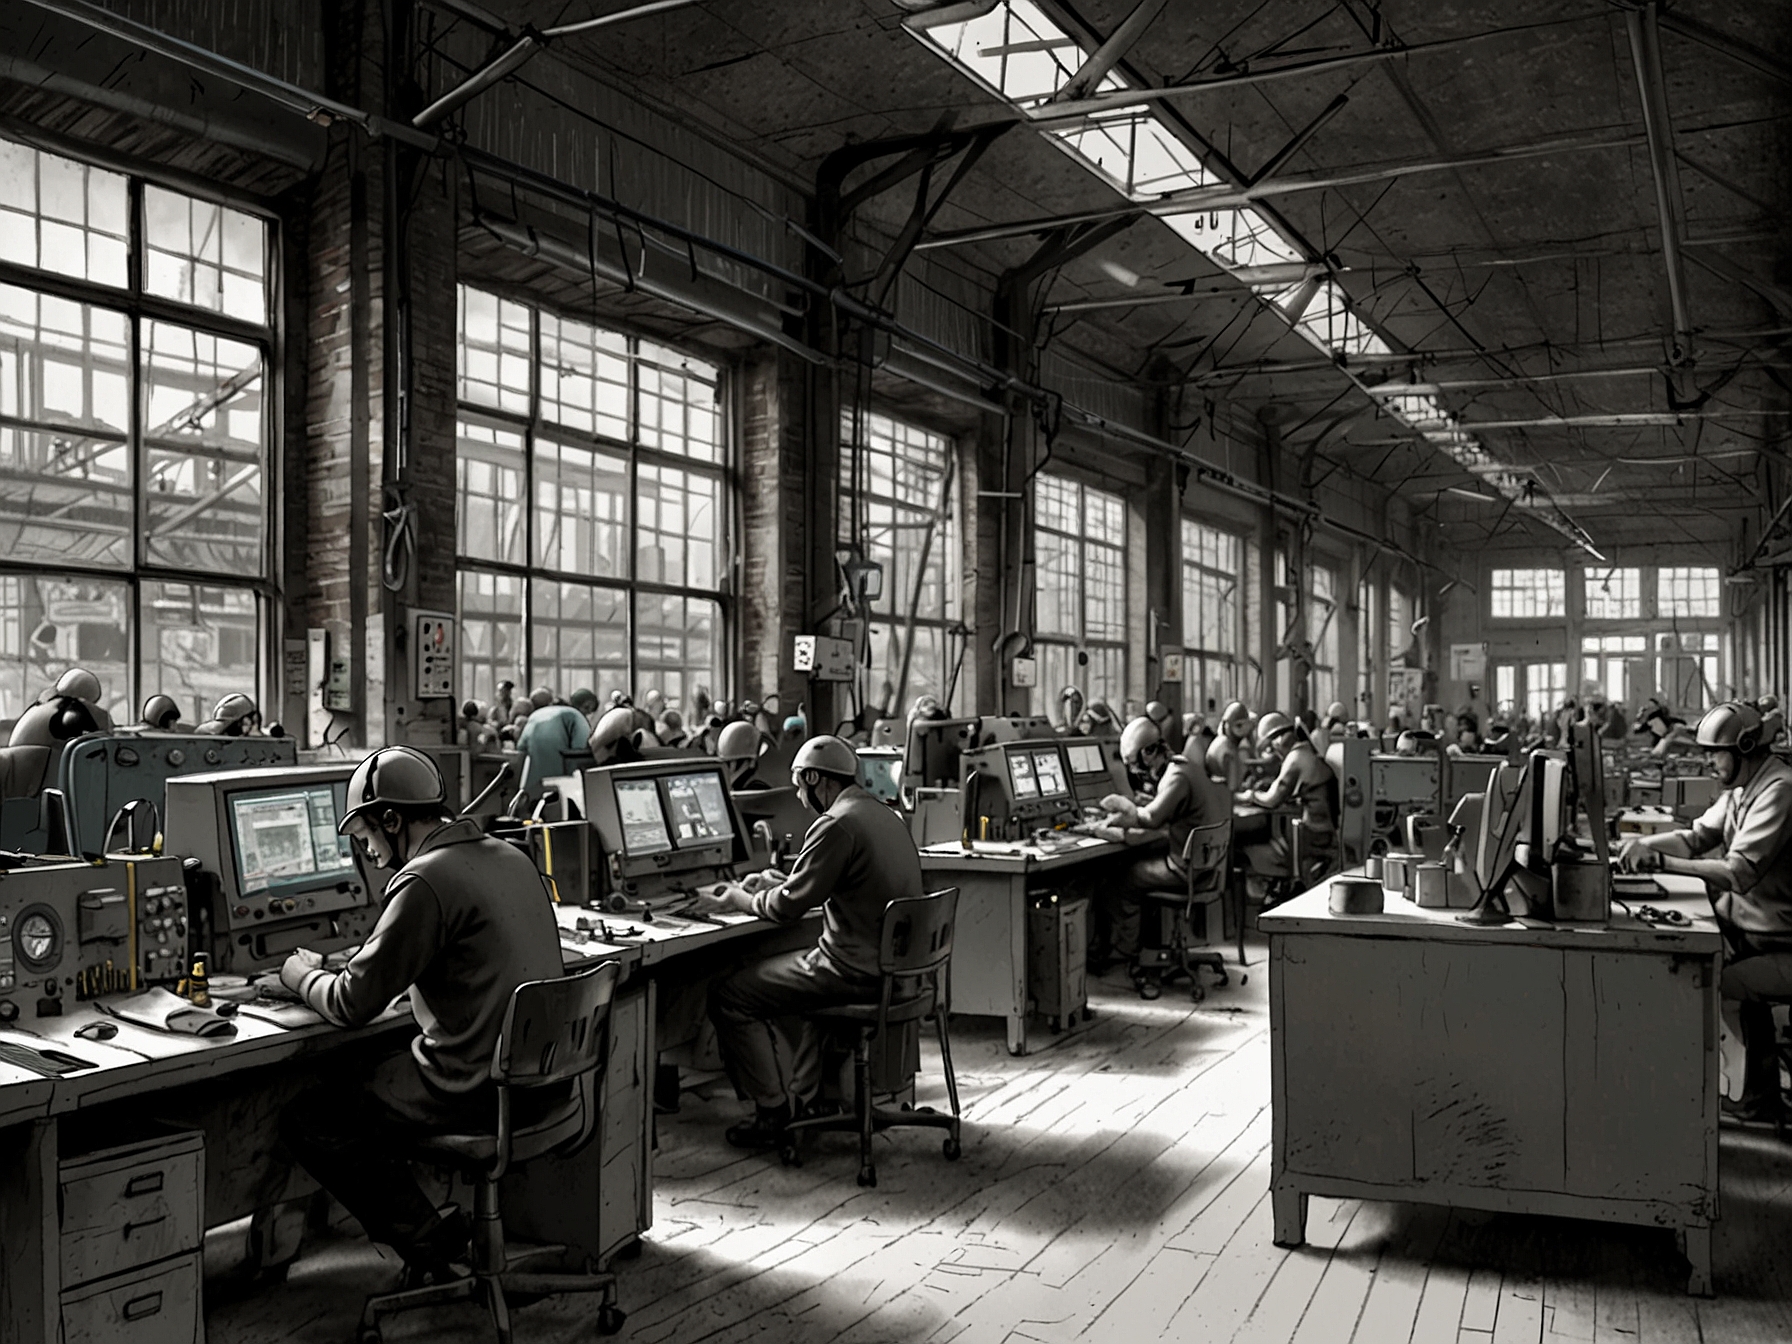 An image portraying a busy factory with disrupted supply chains and rising input costs, highlighting the struggles faced by the UK's manufacturing sector that impacted the PMI.